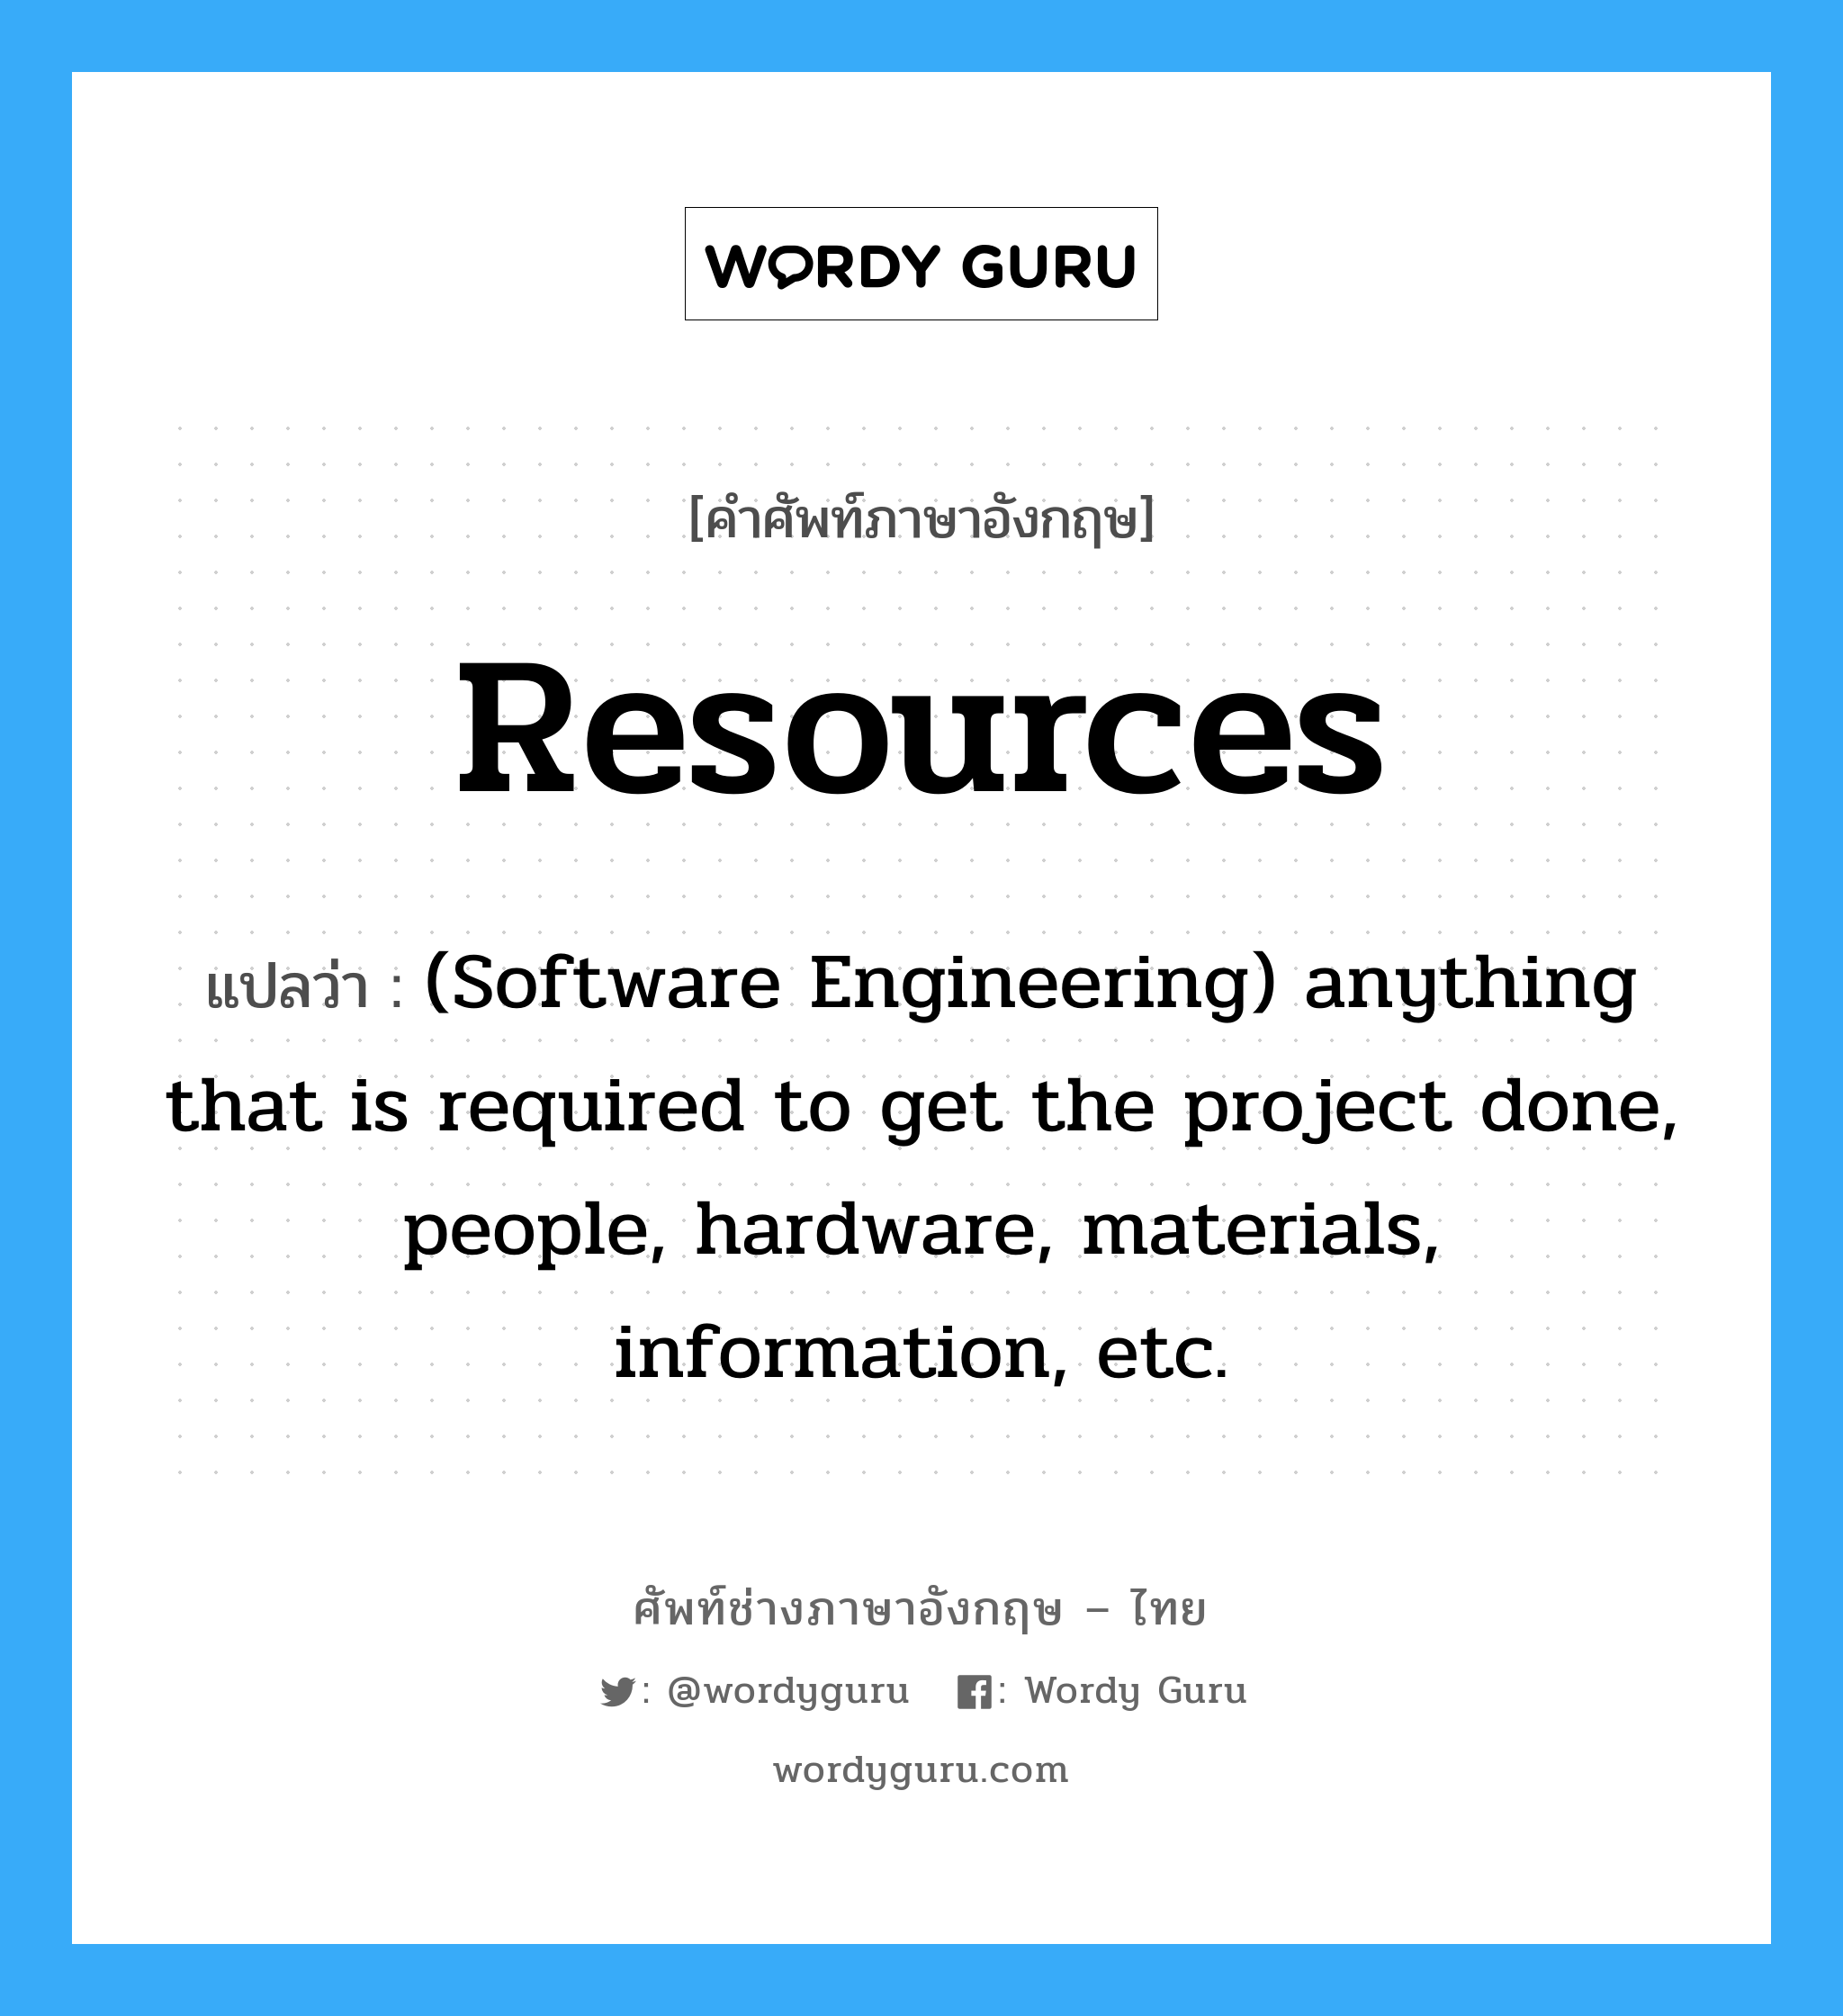 (Software Engineering) anything that is required to get the project done, people, hardware, materials, information, etc. ภาษาอังกฤษ?, คำศัพท์ช่างภาษาอังกฤษ - ไทย (Software Engineering) anything that is required to get the project done, people, hardware, materials, information, etc. คำศัพท์ภาษาอังกฤษ (Software Engineering) anything that is required to get the project done, people, hardware, materials, information, etc. แปลว่า Resources